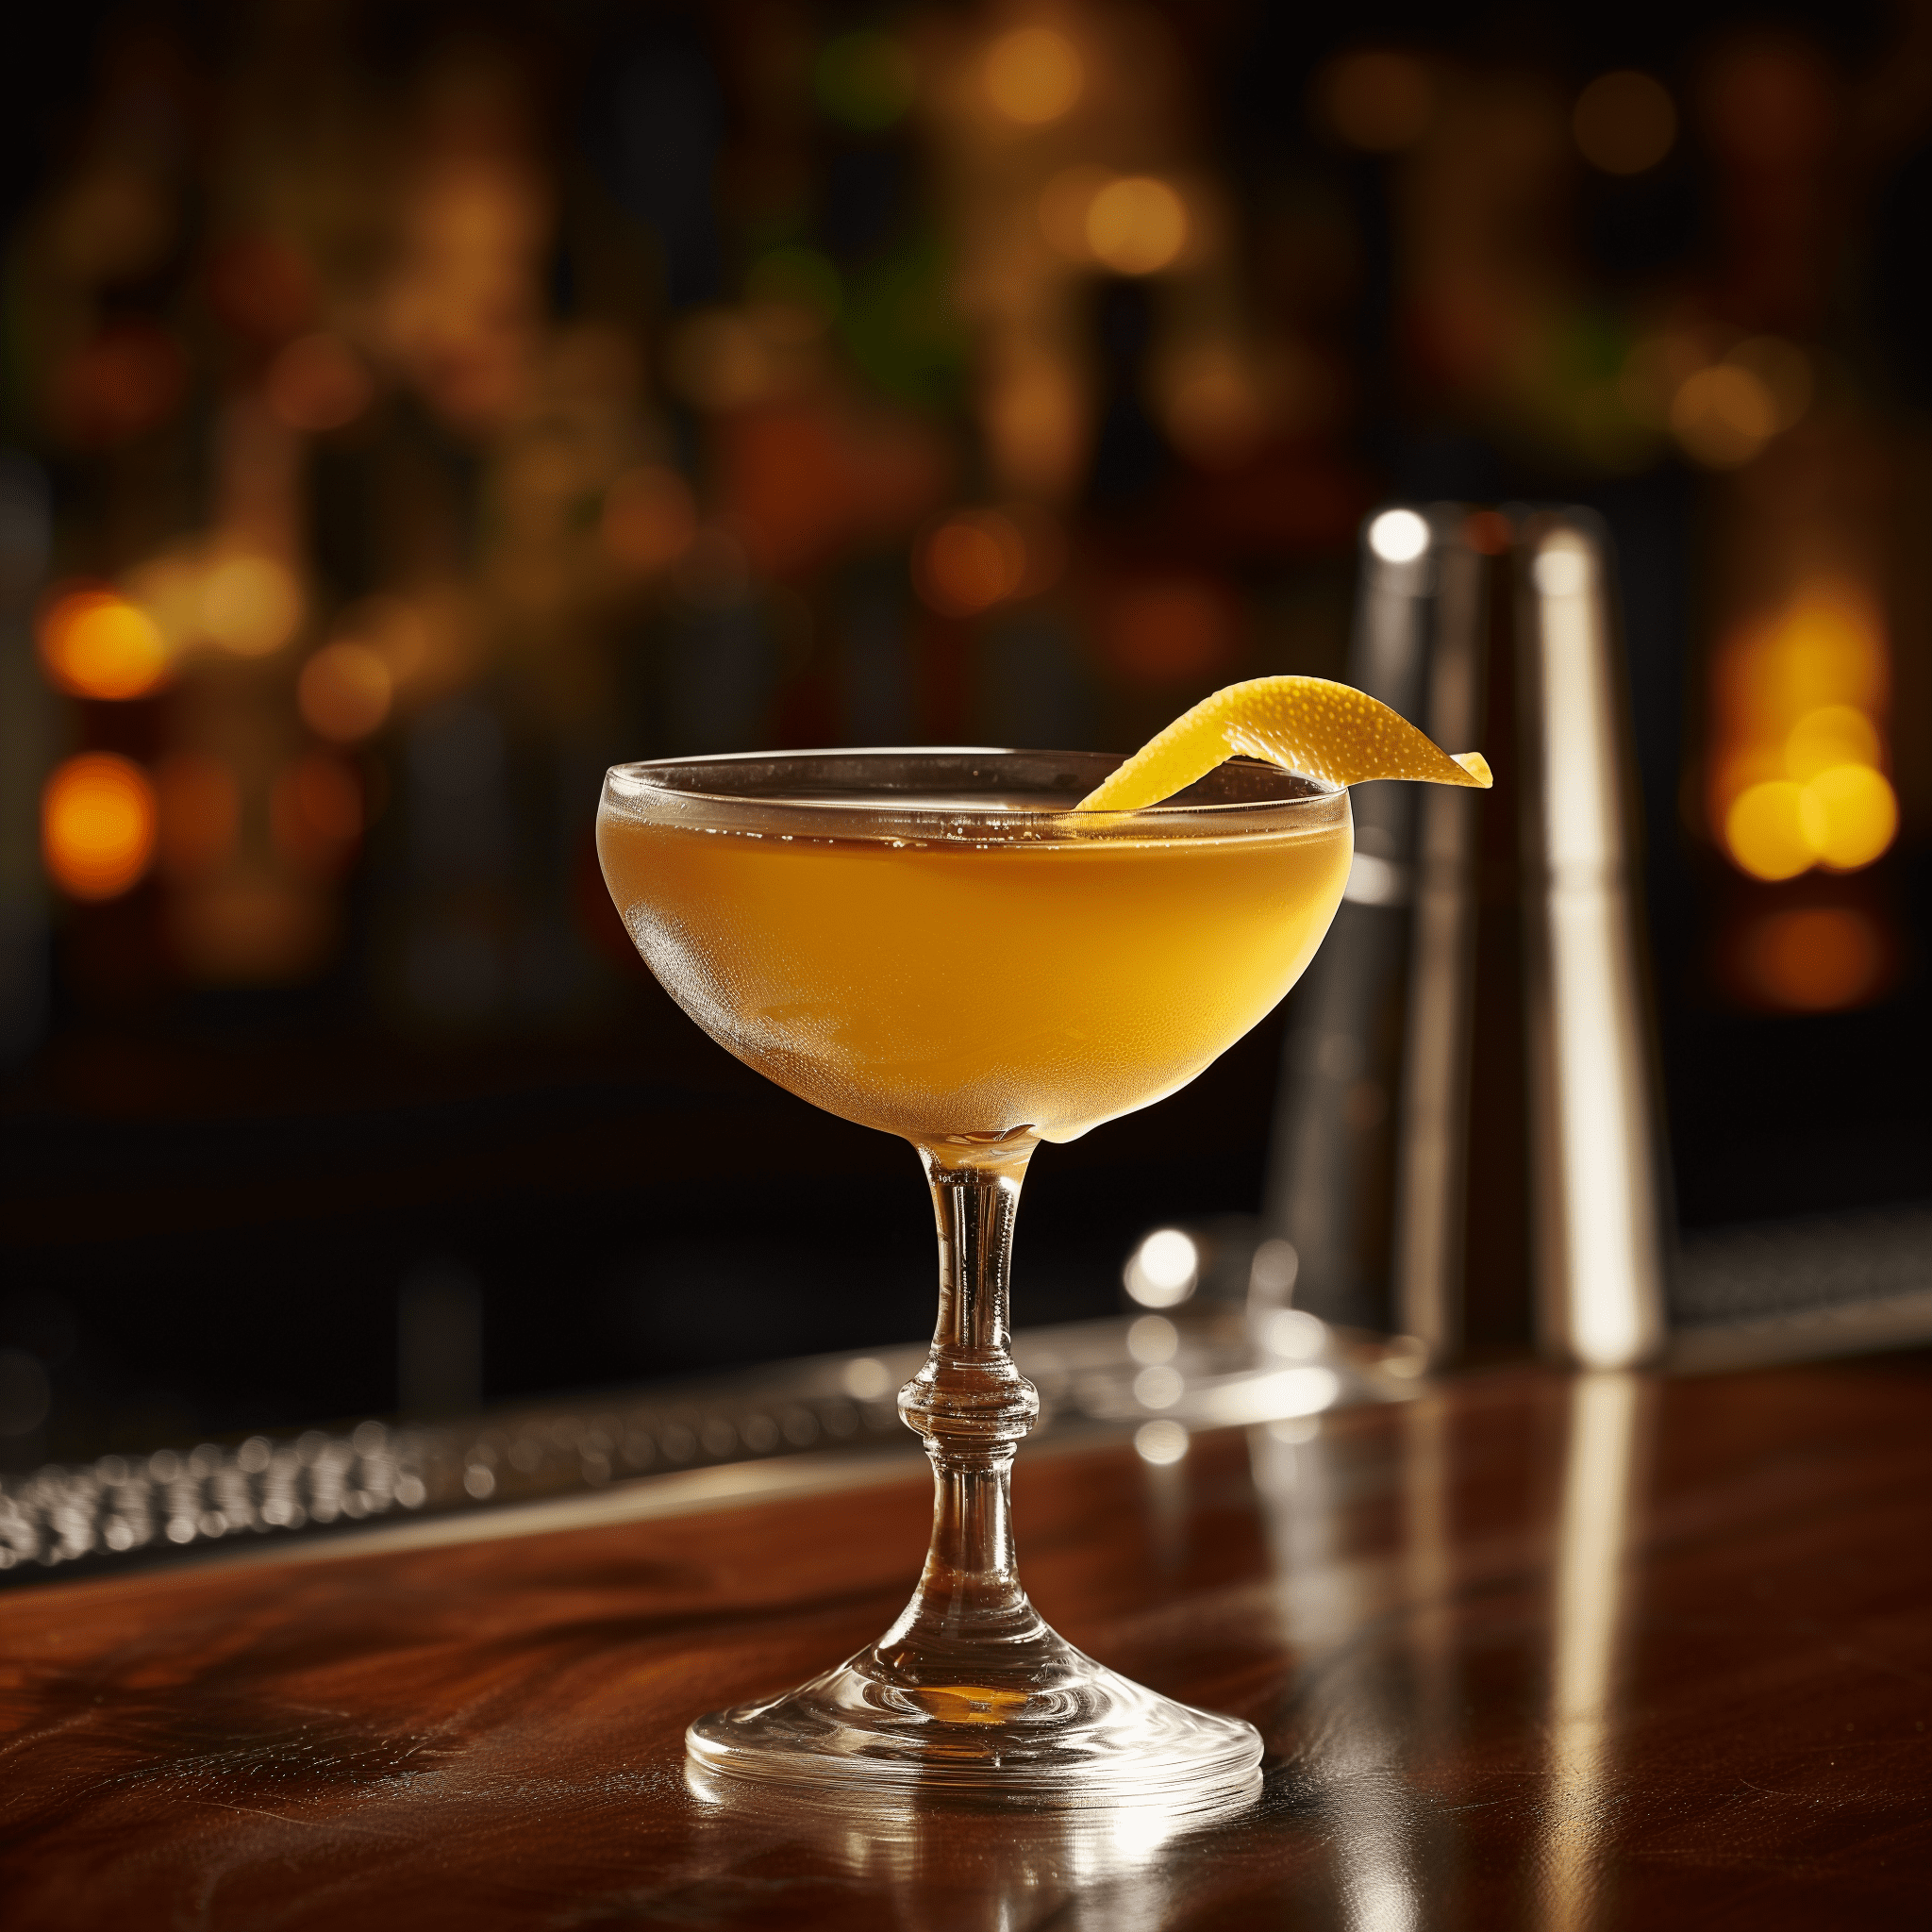 Maximilian Affair Cocktail Recipe - The Maximilian Affair offers a smoky base with a sweet, floral undertone, and a hint of bitterness from the Punt e Mes. It's a complex, layered drink that's both refreshing and bold.